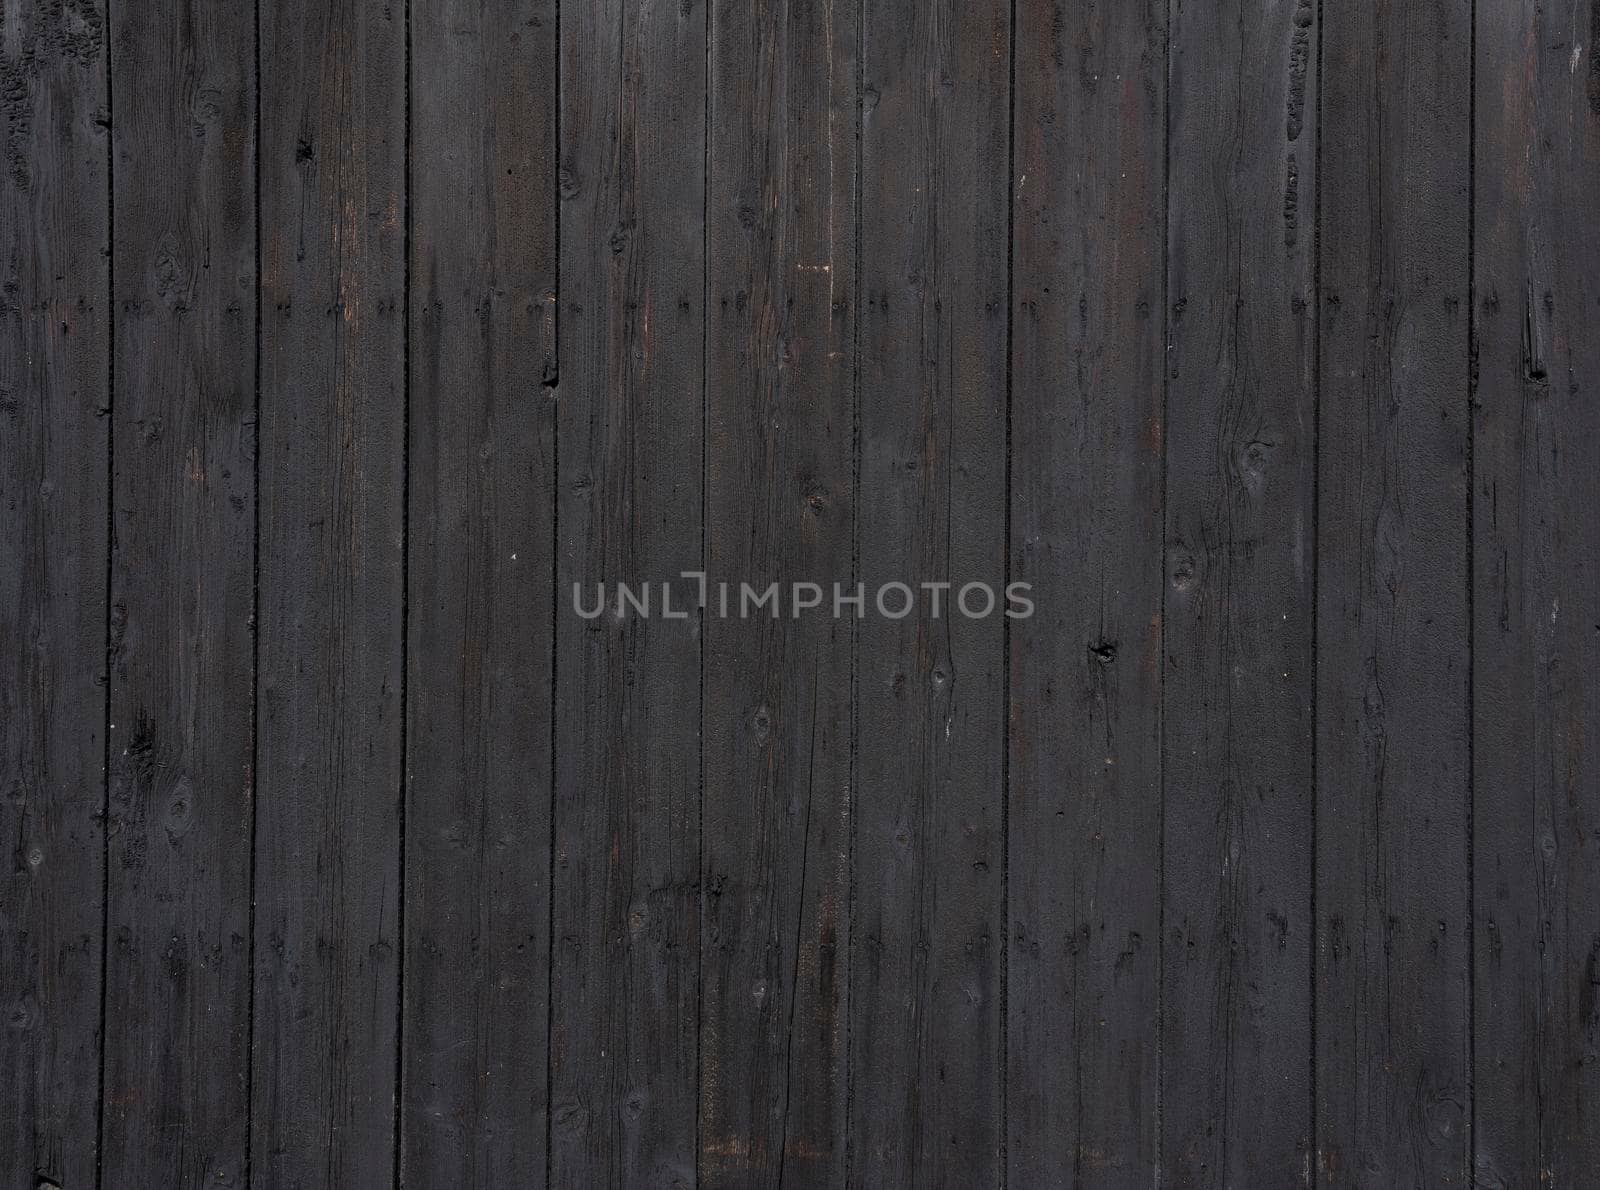 black background pattern of vertical wooden old grungy painted planks on old barn